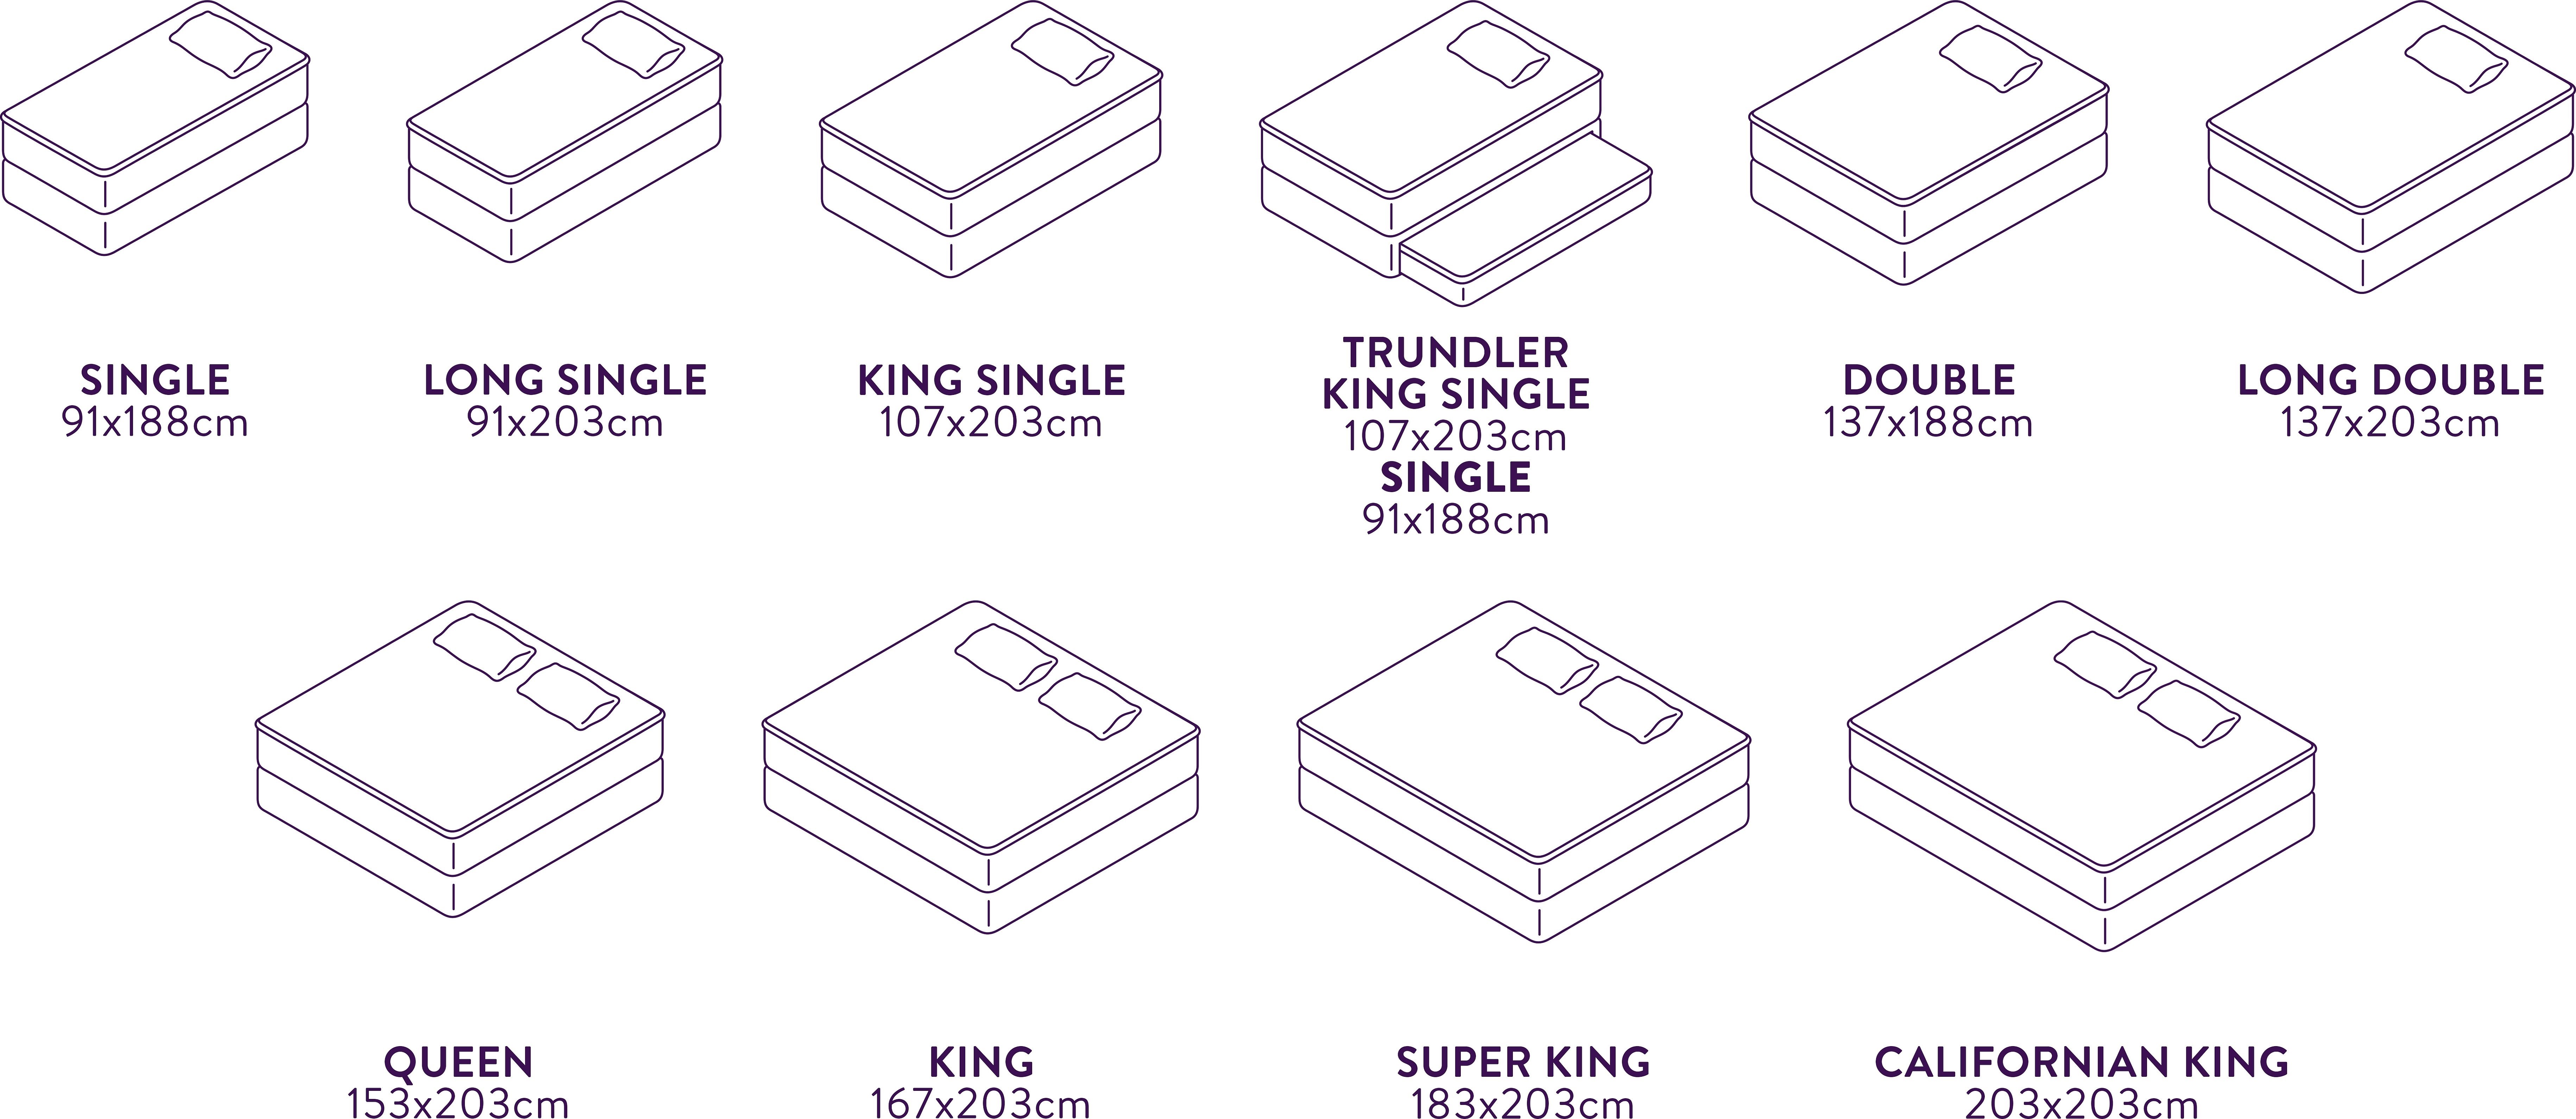 Dimensions of beds